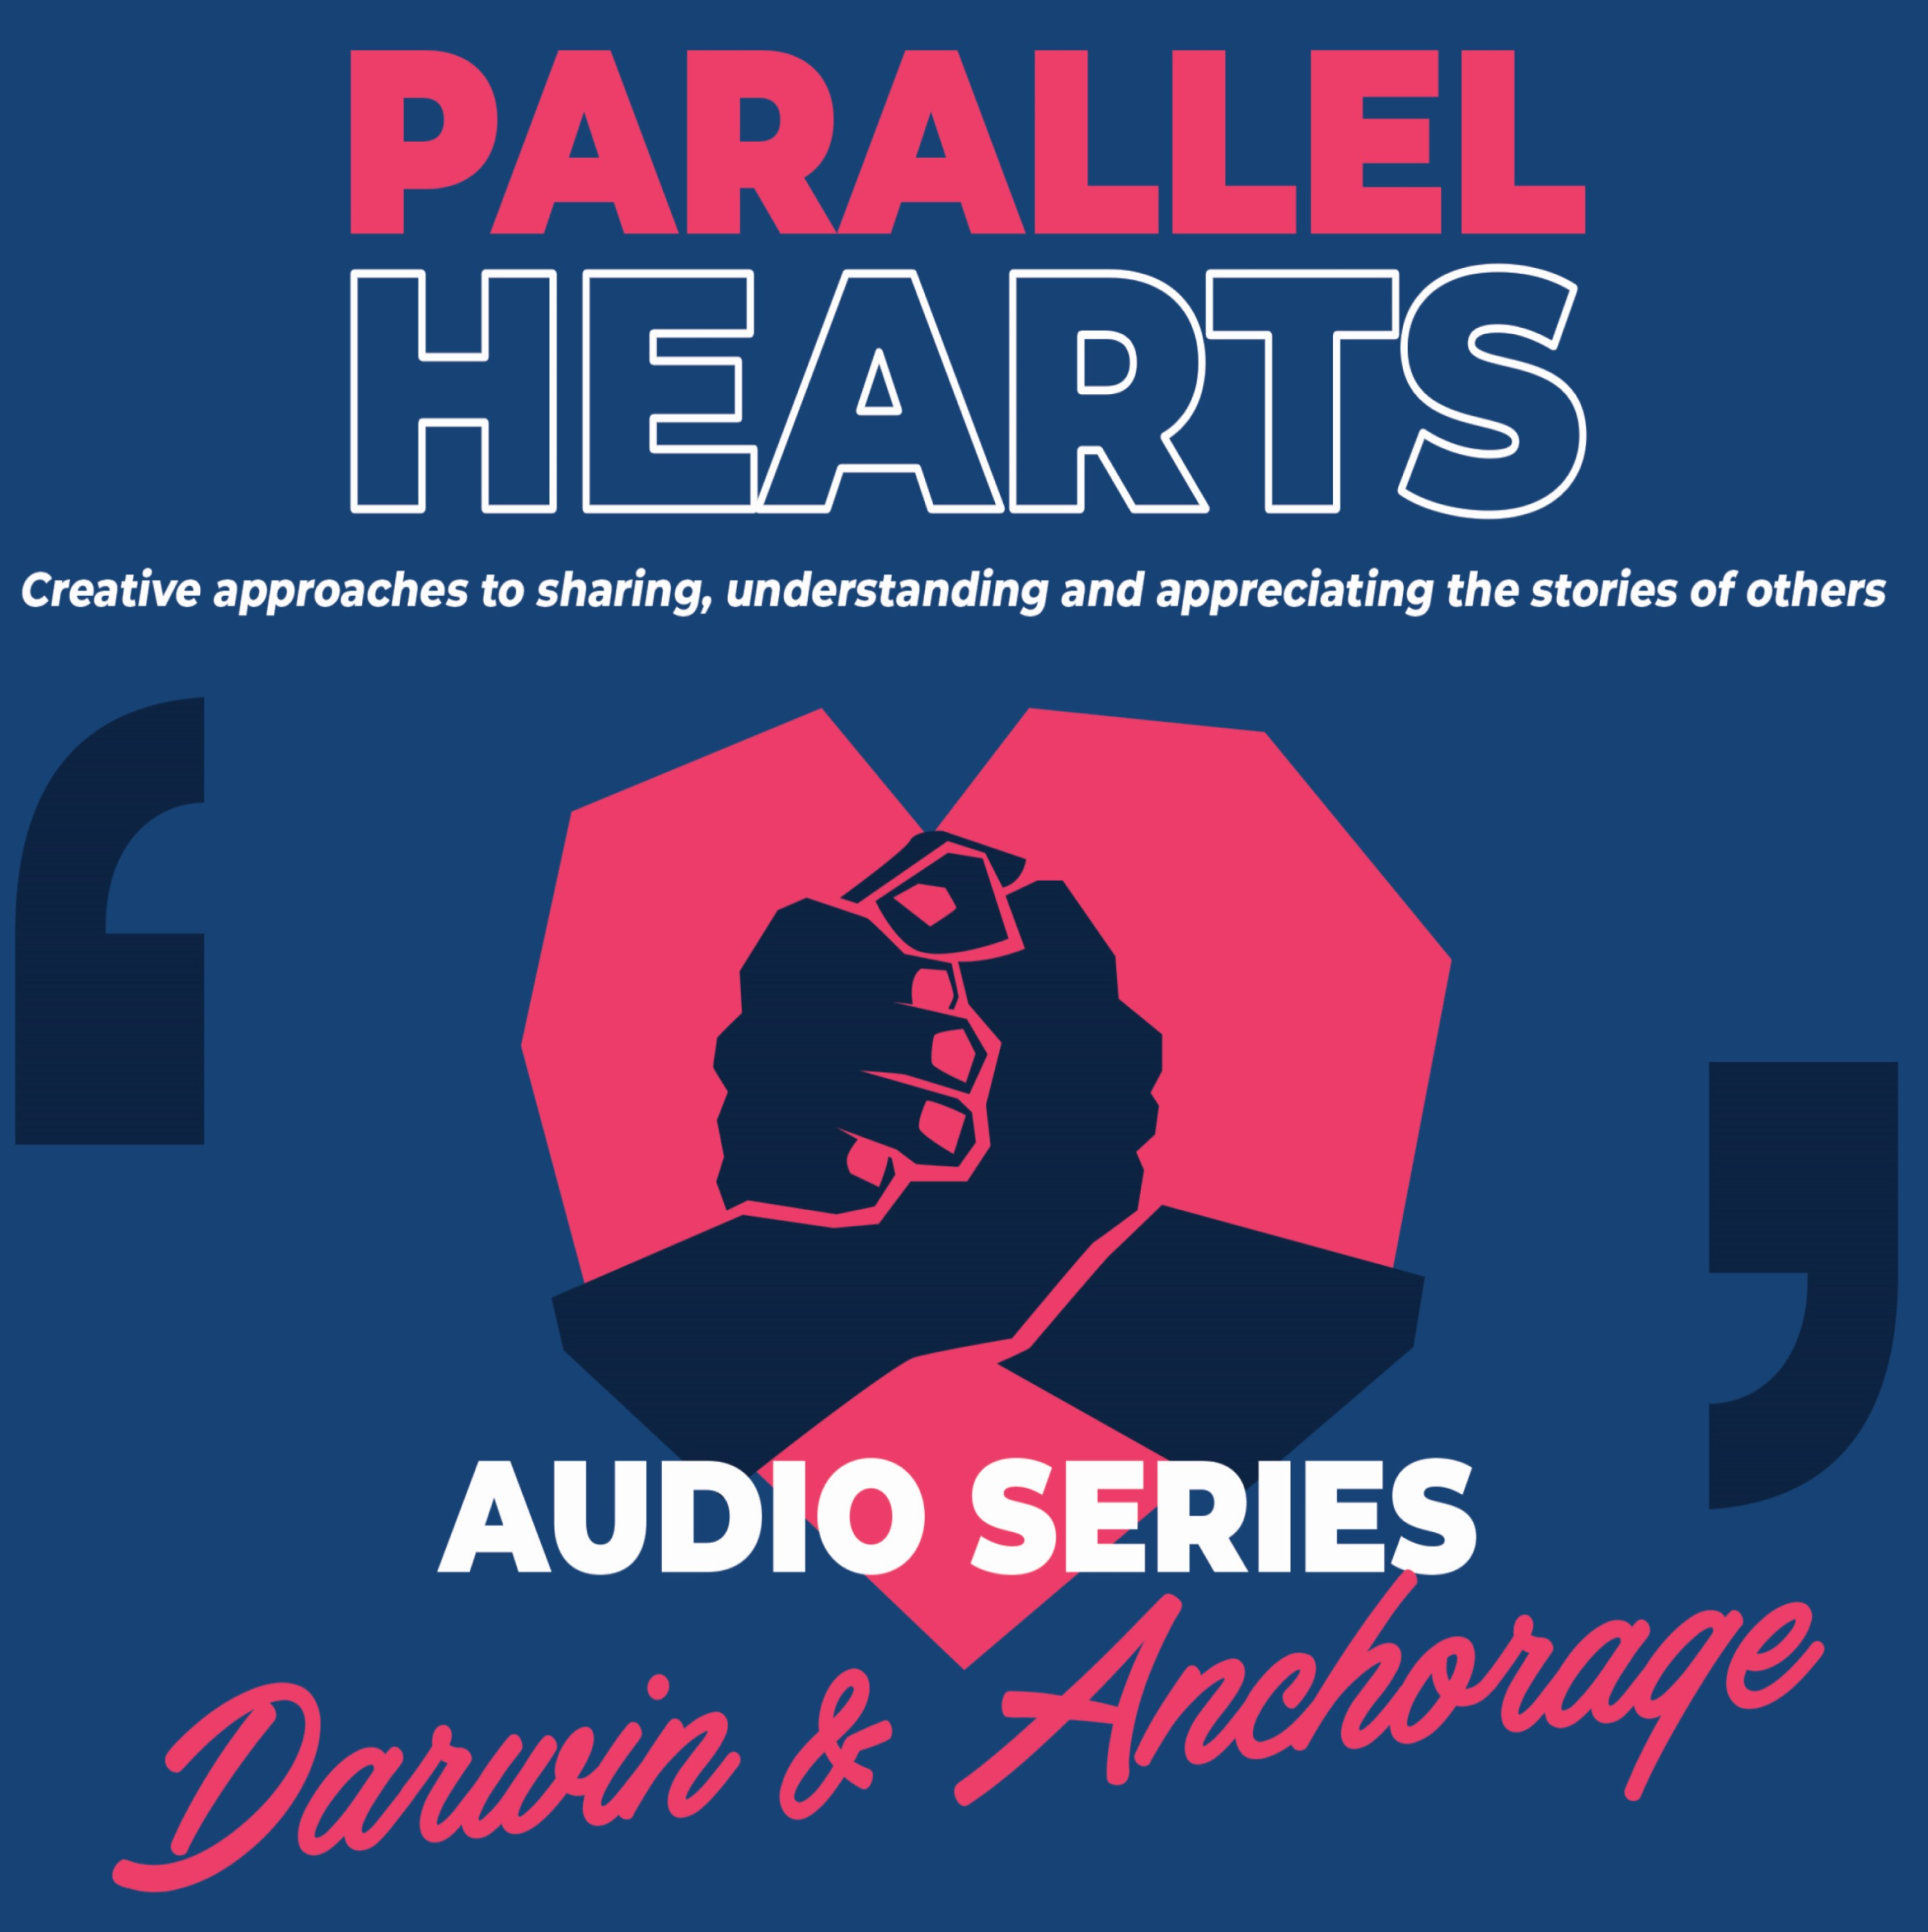 Parallel Hearts - Introduction